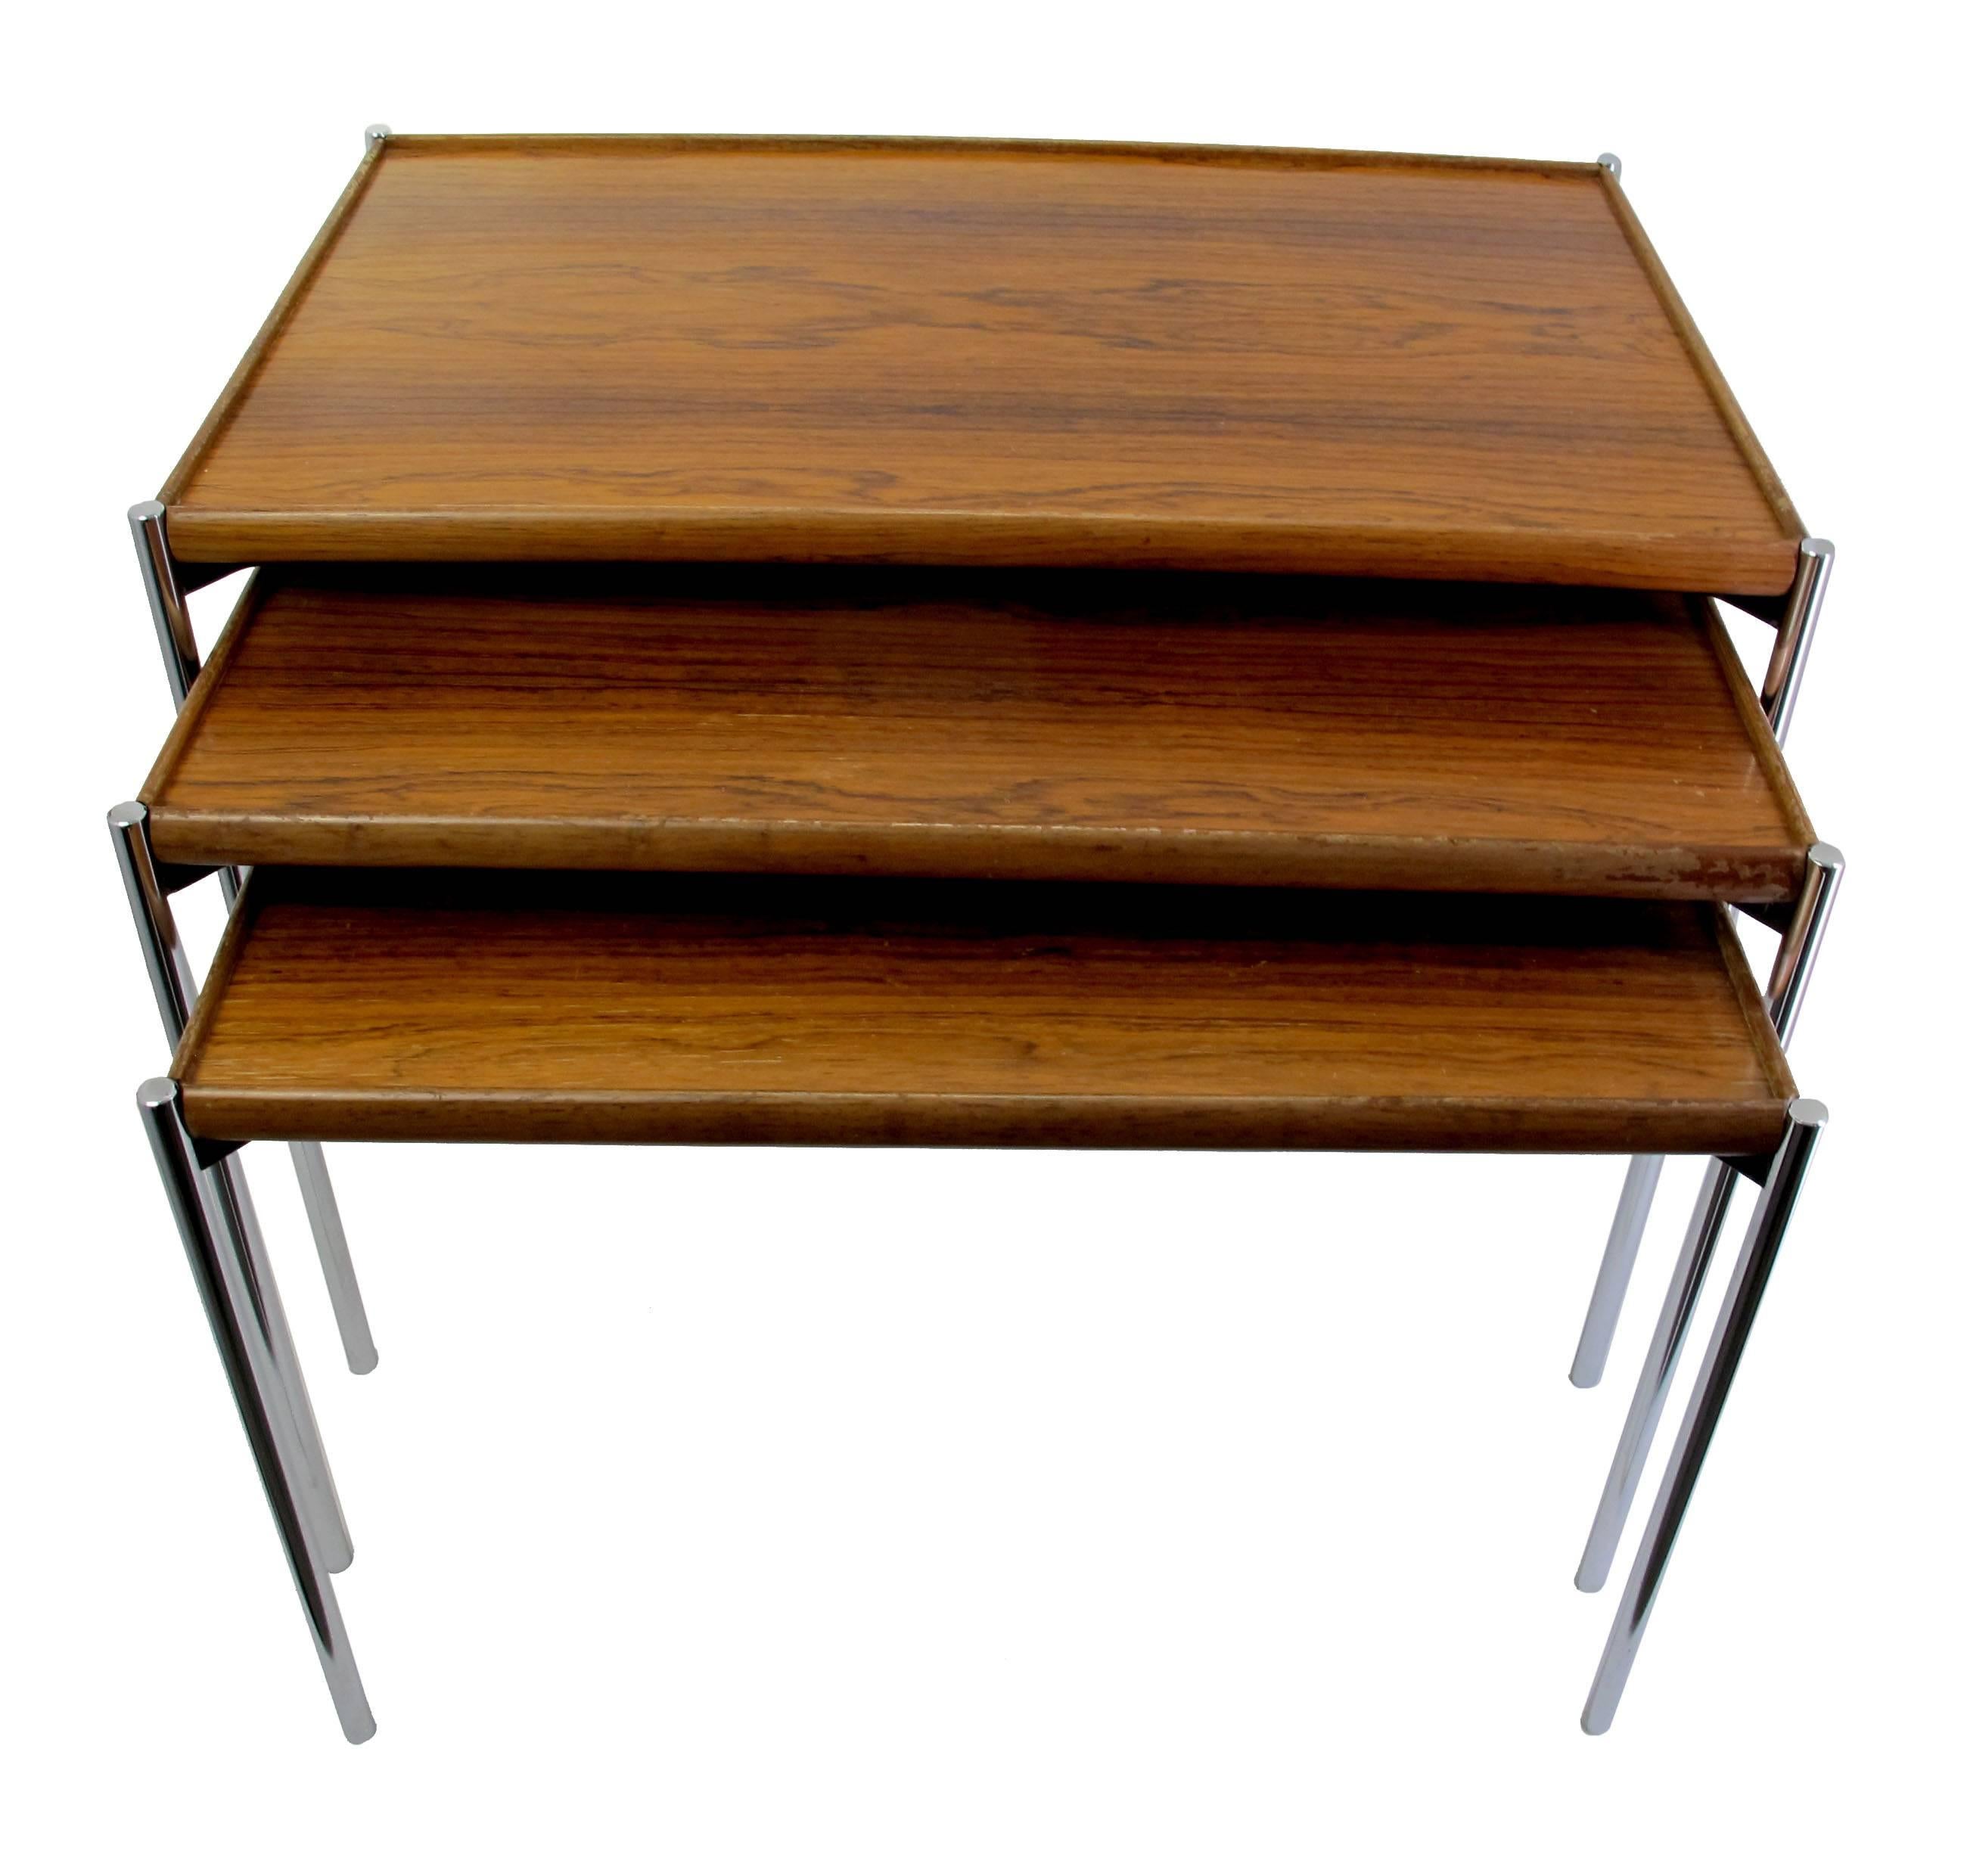 This set of three reversible, model 125 teak nesting tables was designed during the 1960s, and manufactured in Germany by Lämmle & Co. Each table features stainless steel legs and a teak table top which can also be used on the white reverse side.